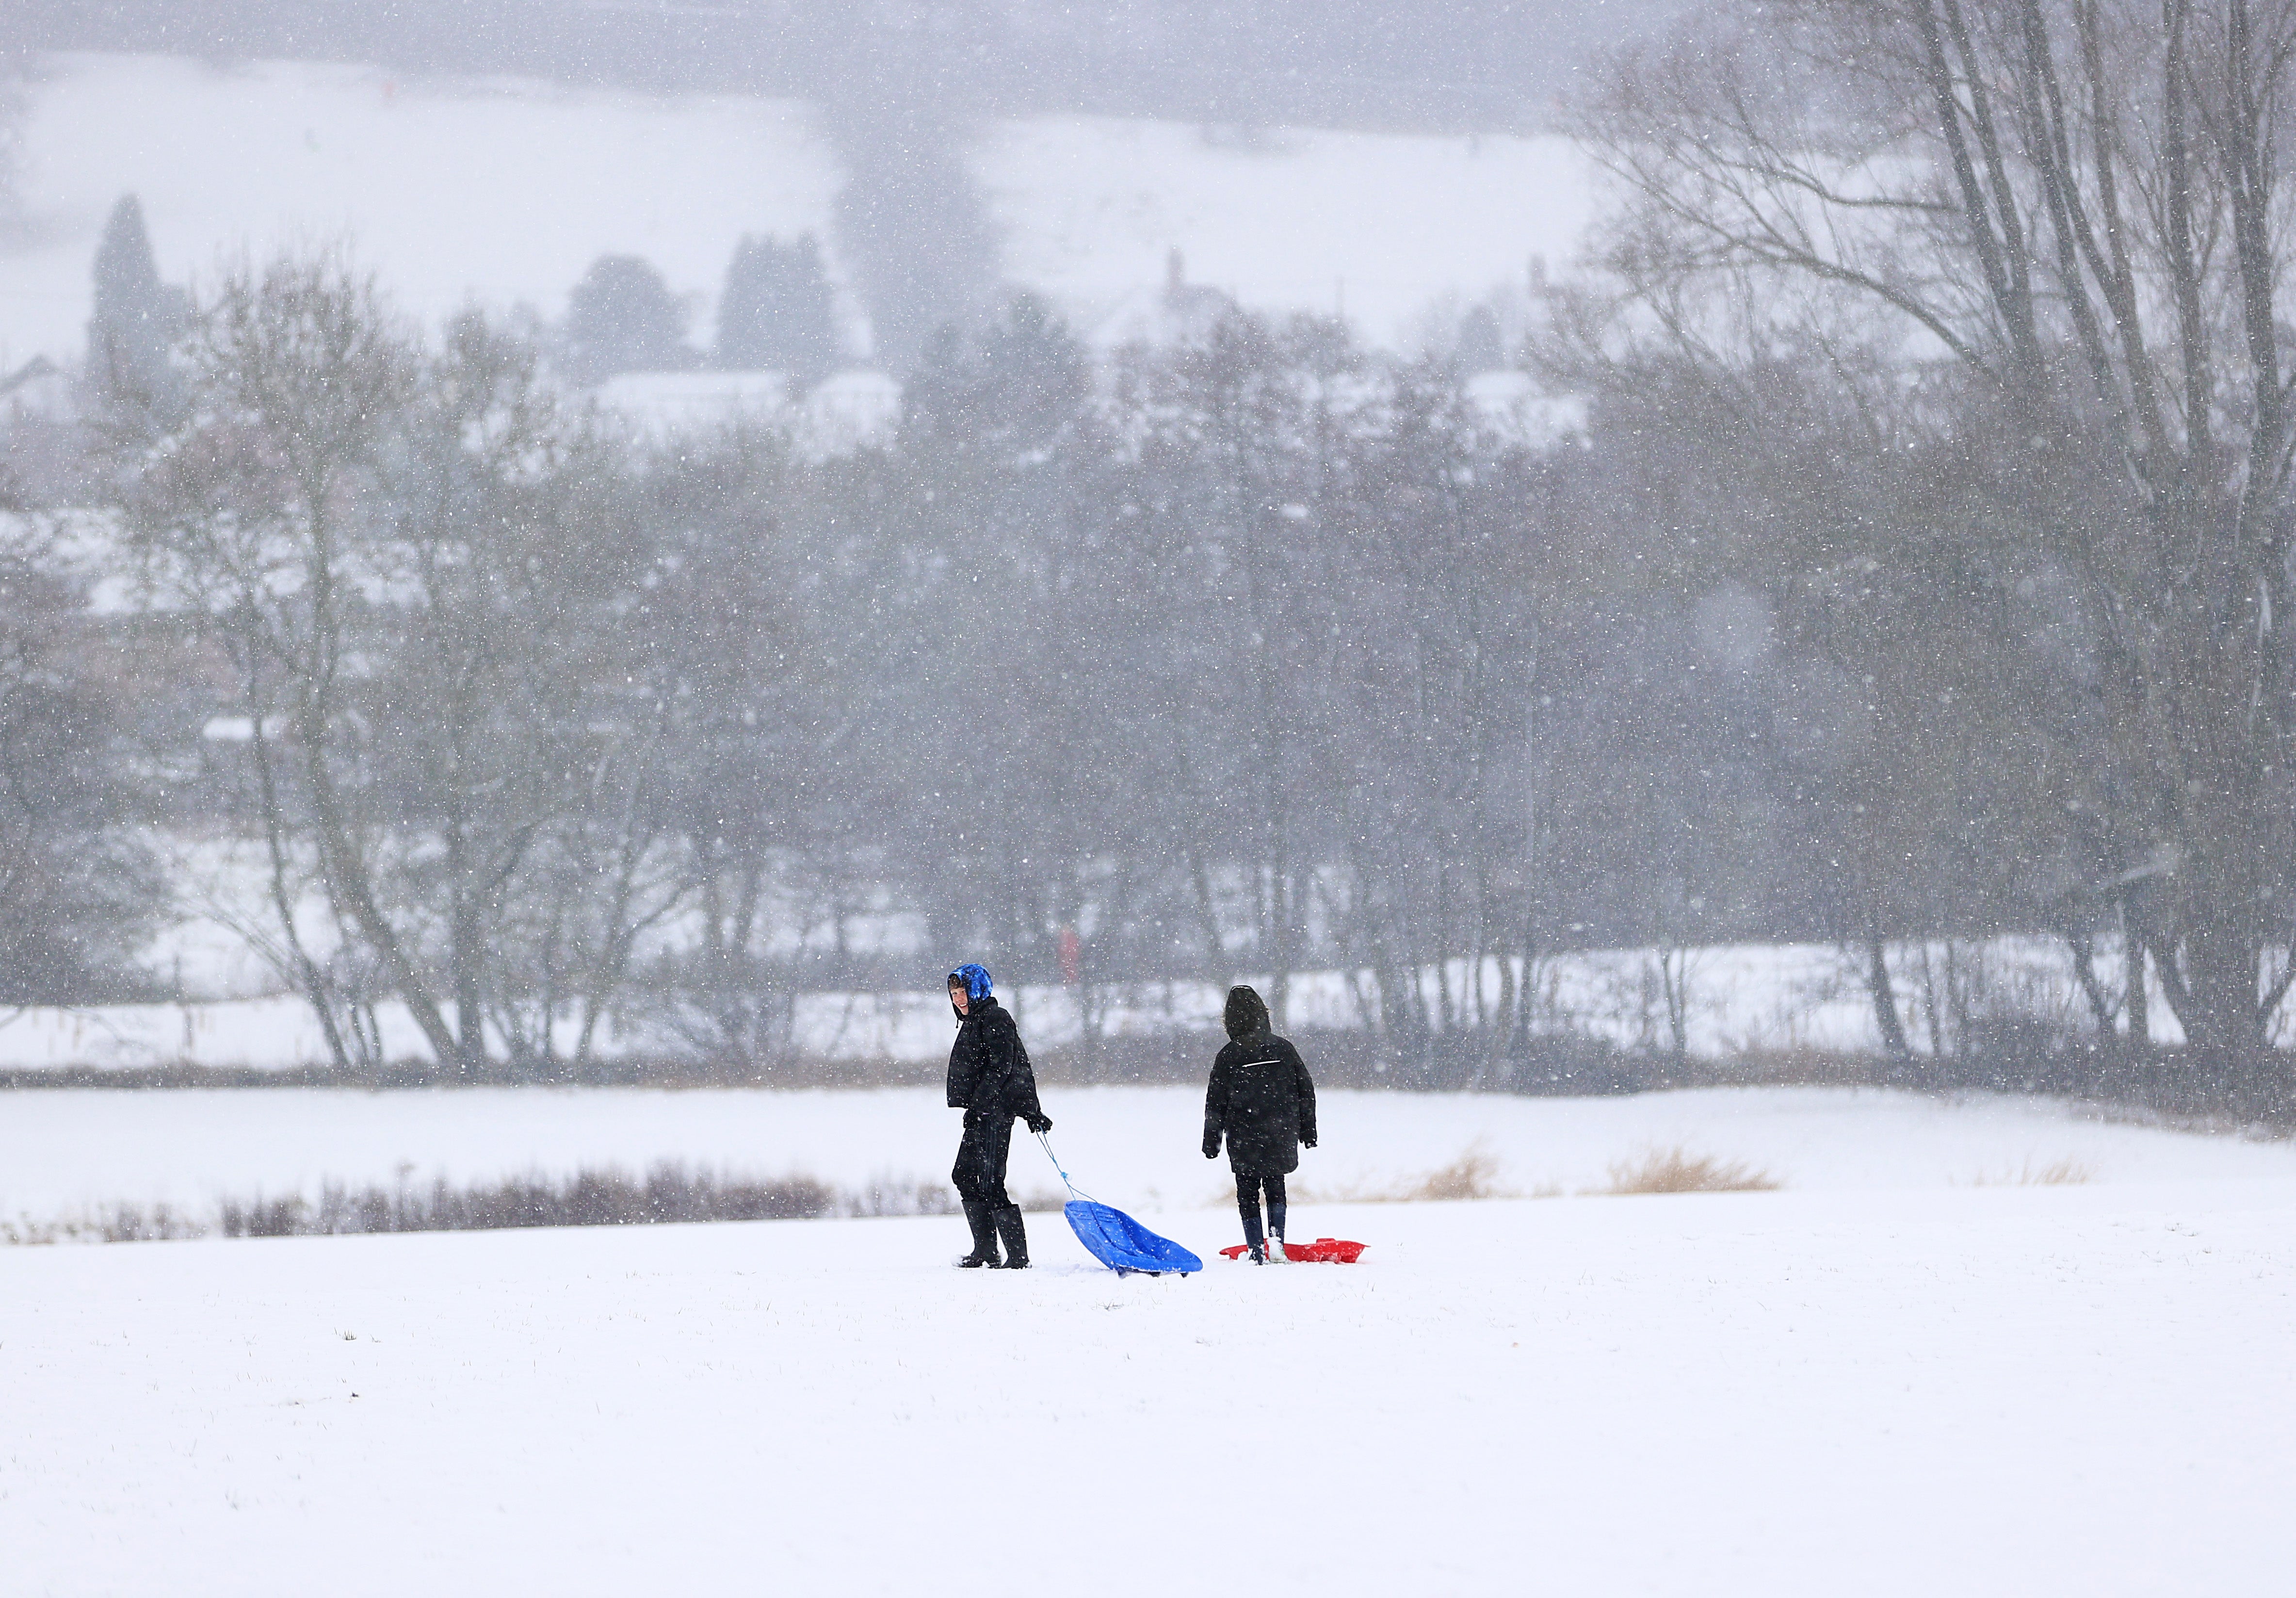 Snow hit parts of the UK earlier this month - and the cold weather isn’t out of the way yet